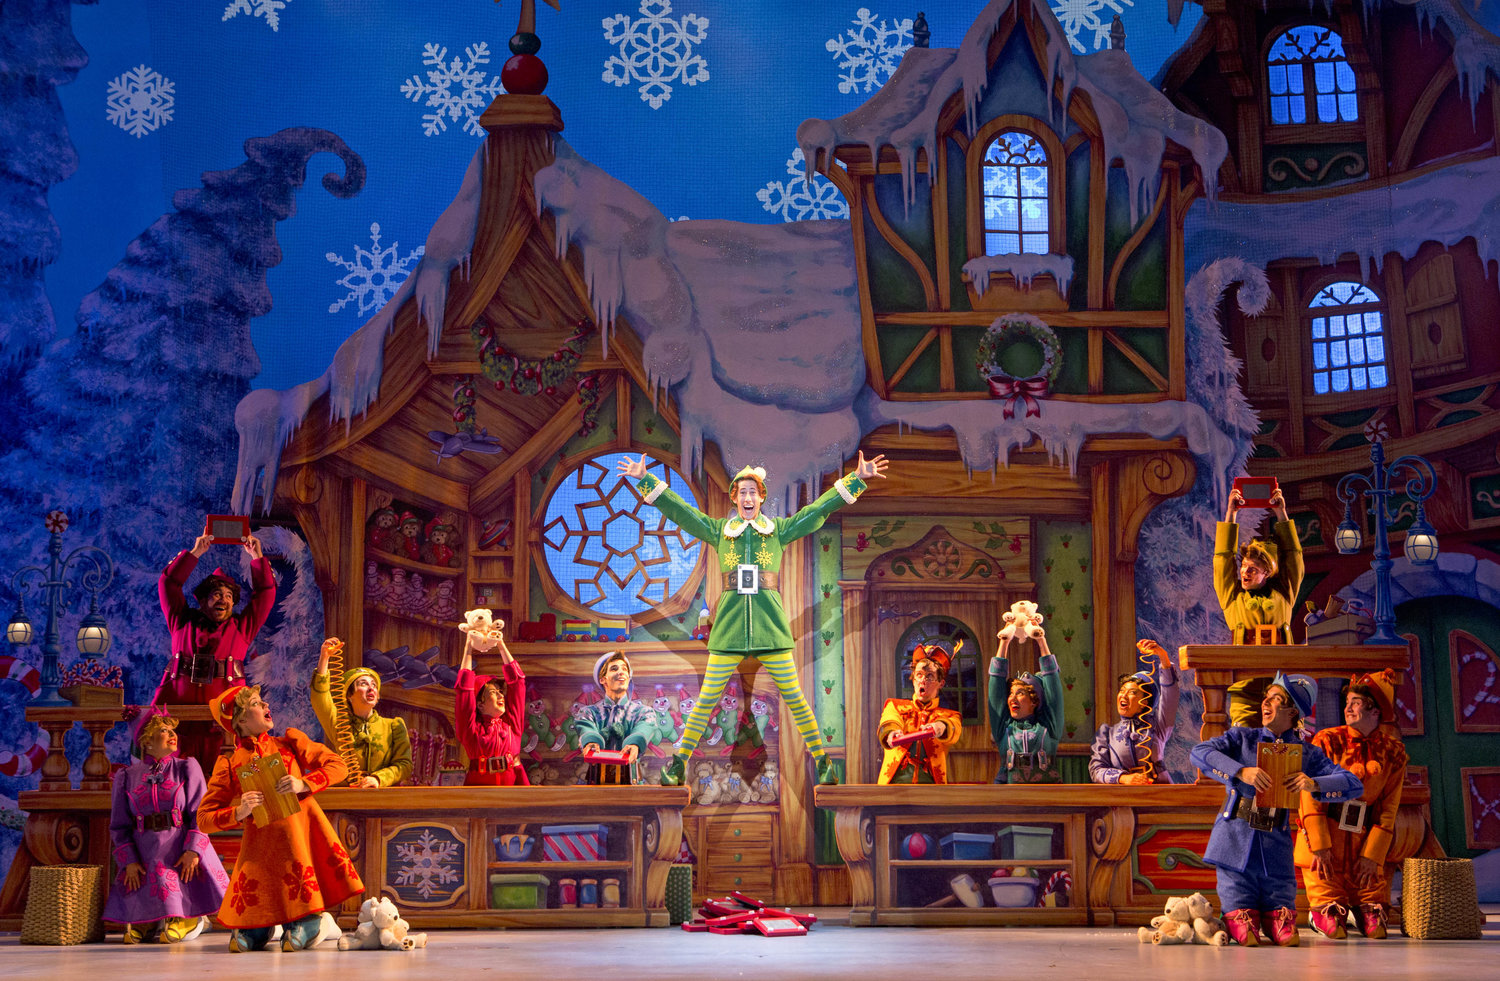 The Broadway Theatre League presents ‘Elf the Musical’ at 7 p.m. Nov. 16-17 at The Stanley Theatre in Utica.